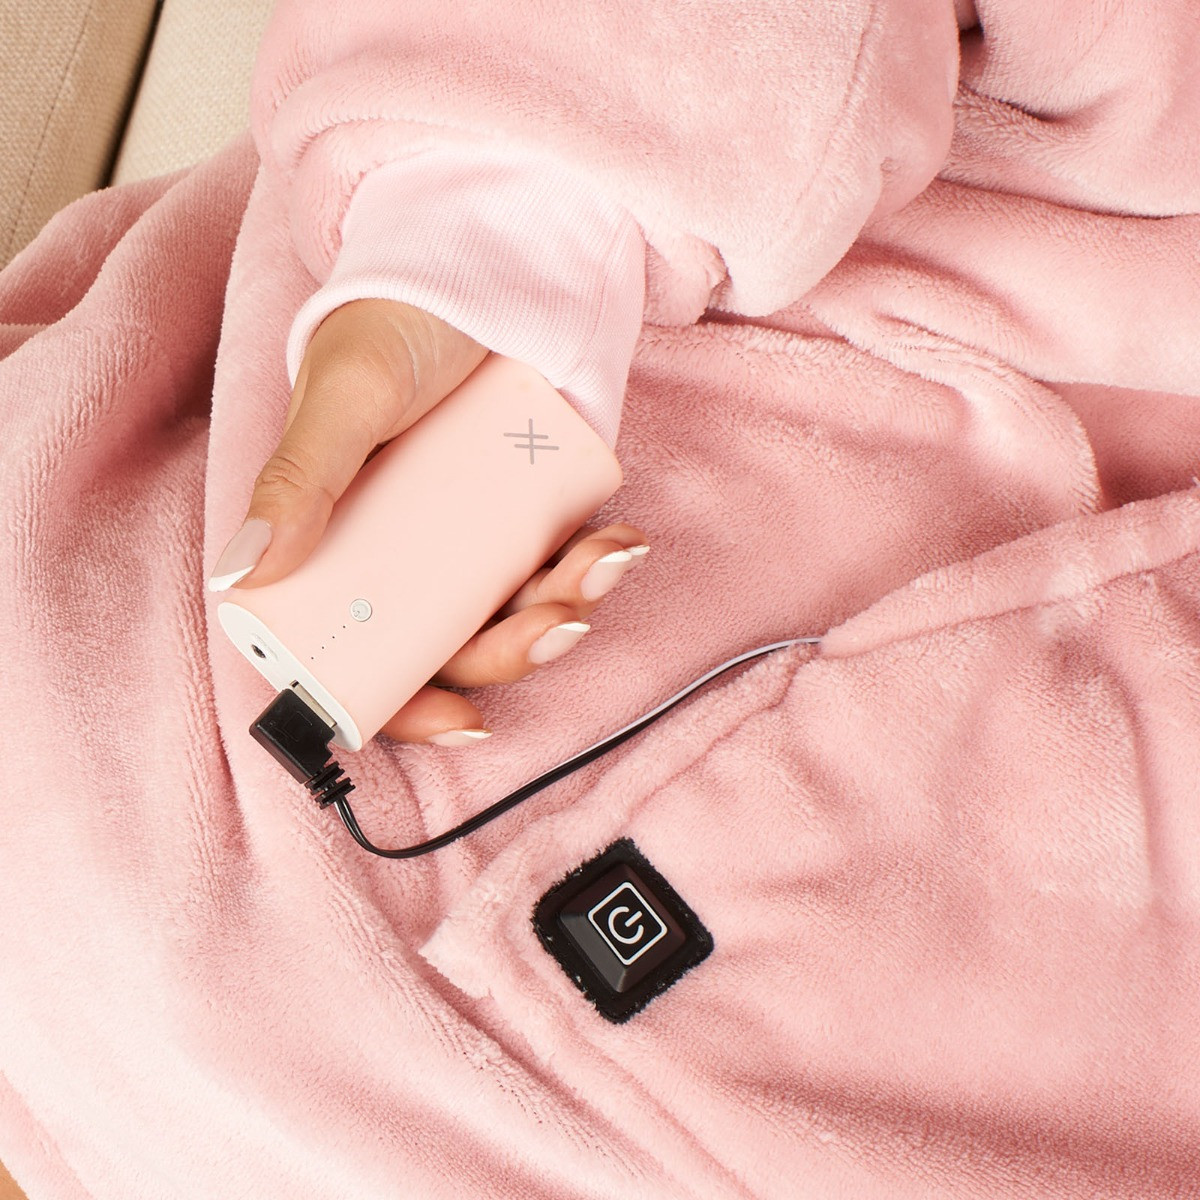 OHS Adults Electric Heated Oversized Hoodie Blanket - Blush>